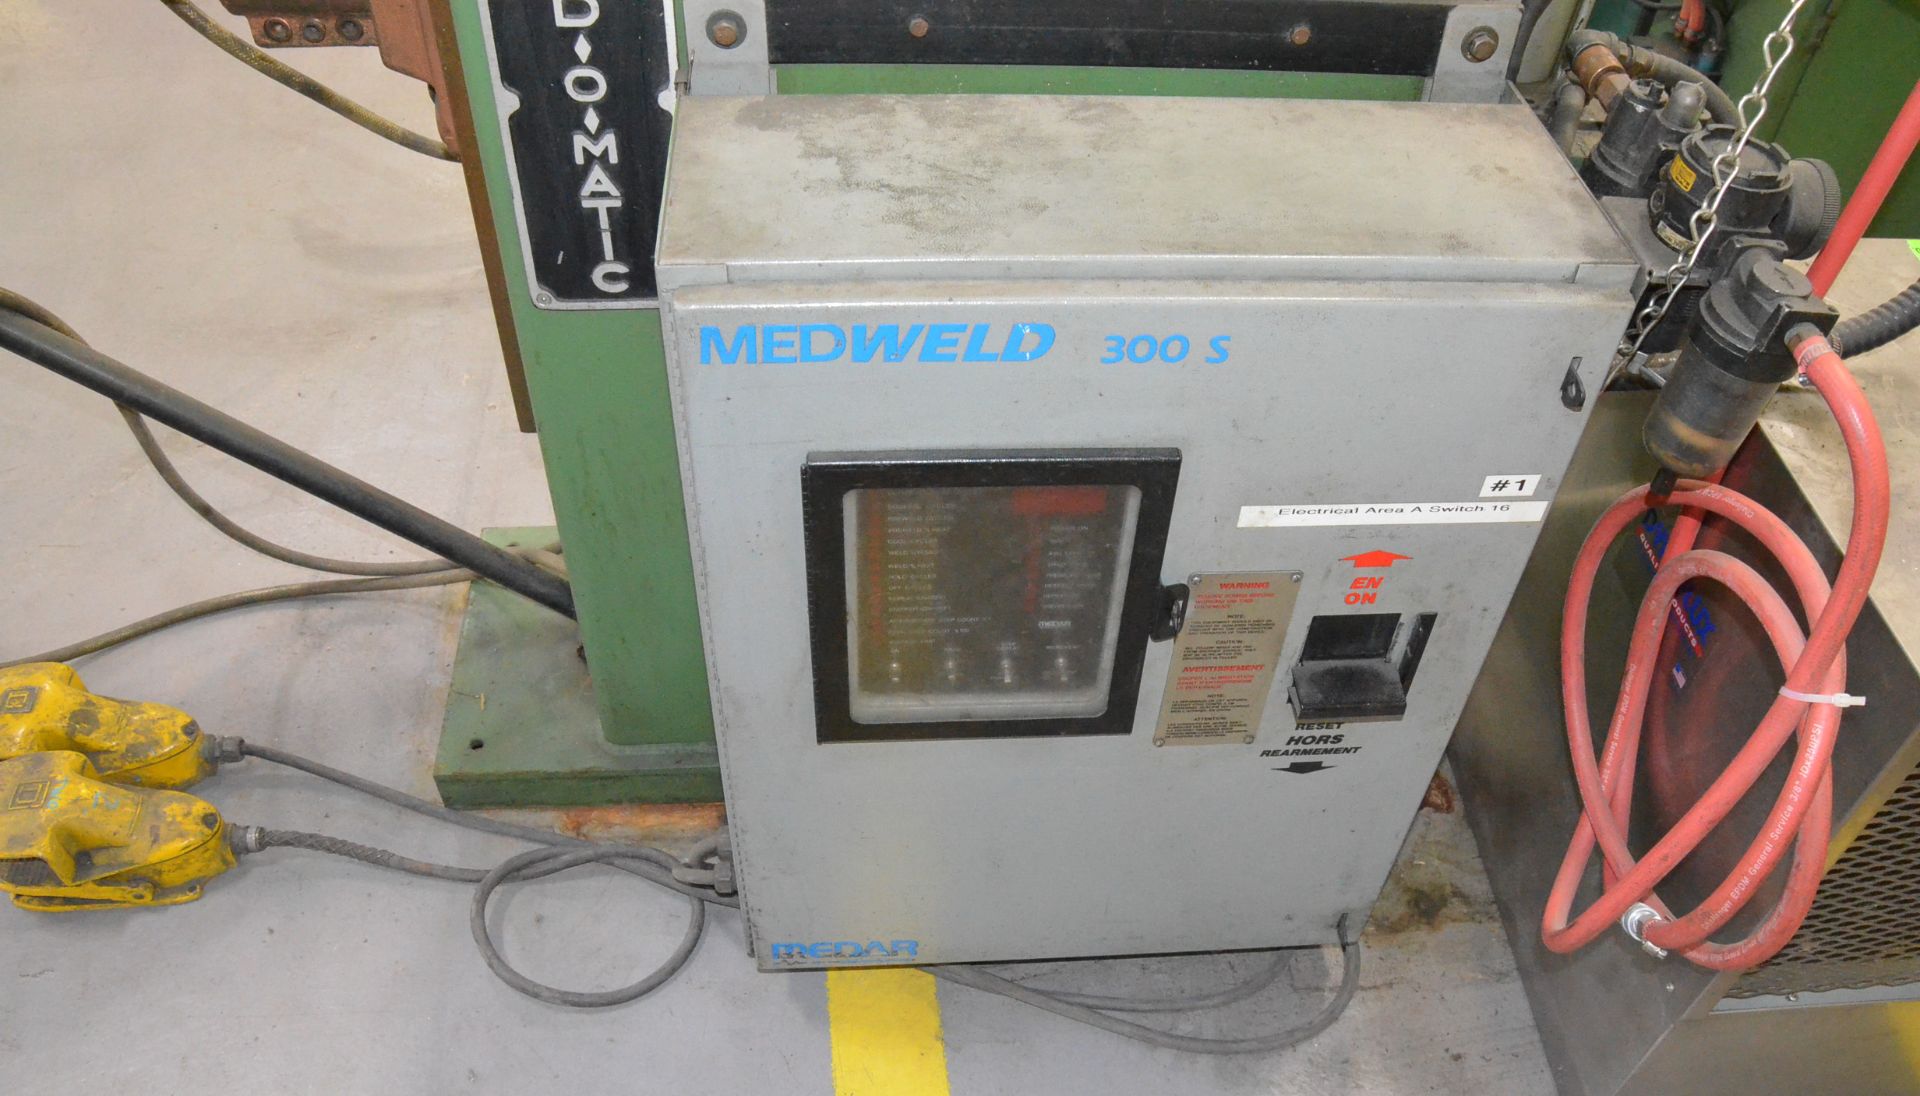 WELD-O-MATIC AF-2B FLOOR-TYPE SPOT WELDER WITH 50 KVA, 35" THROAT, MEDWELD 300S CONTROL, 575V/1PH/ - Image 3 of 4